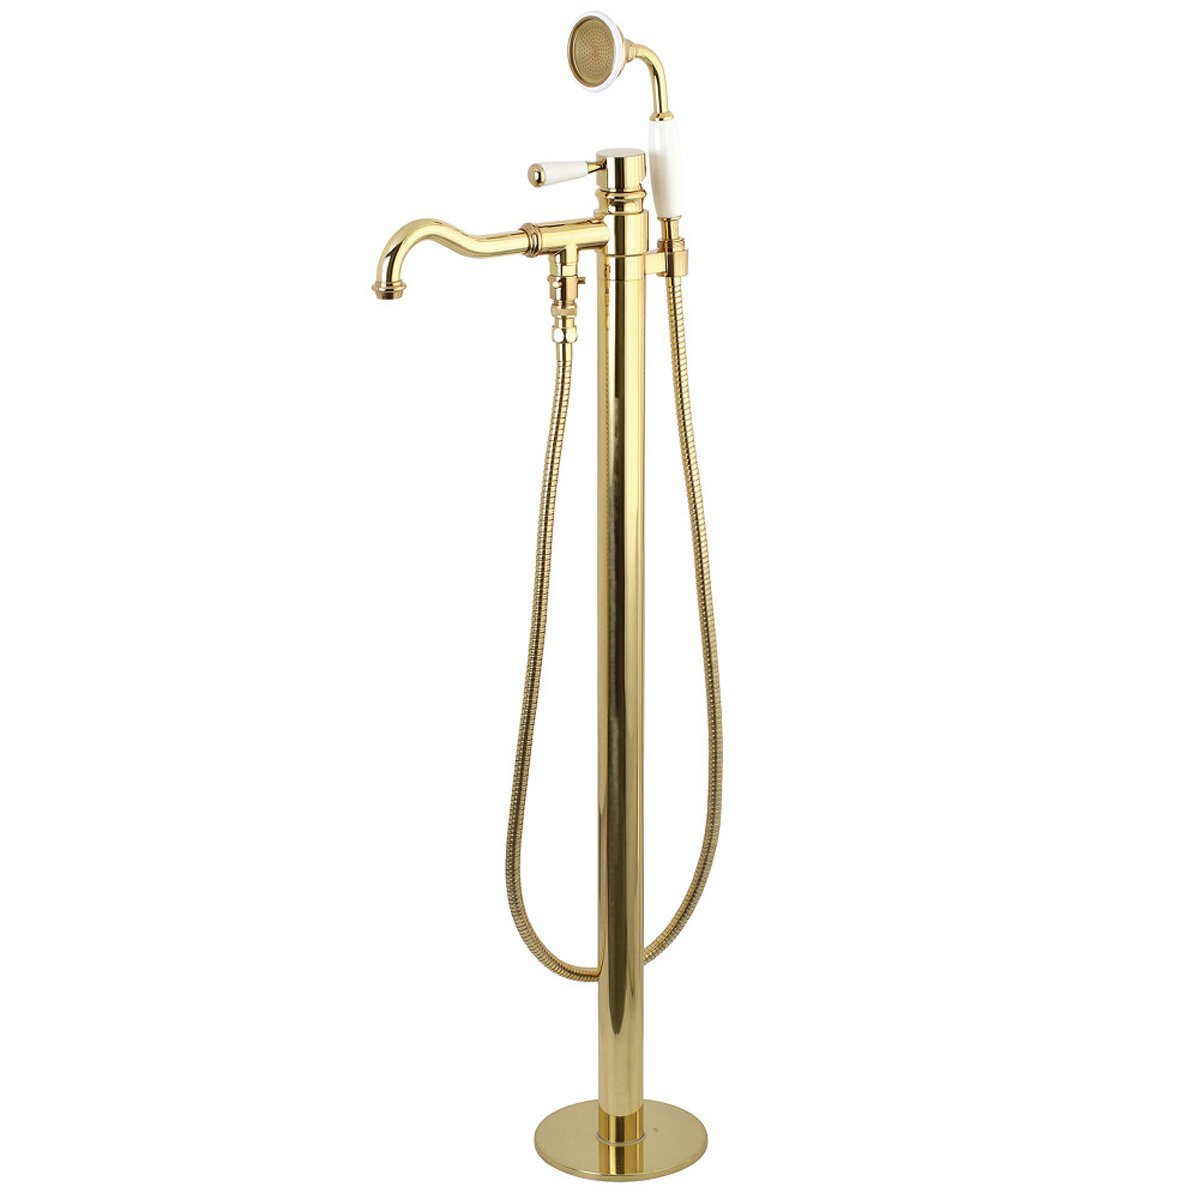 Kingston Brass Paris Freestanding Tub Faucet with Hand Shower and Single Handle